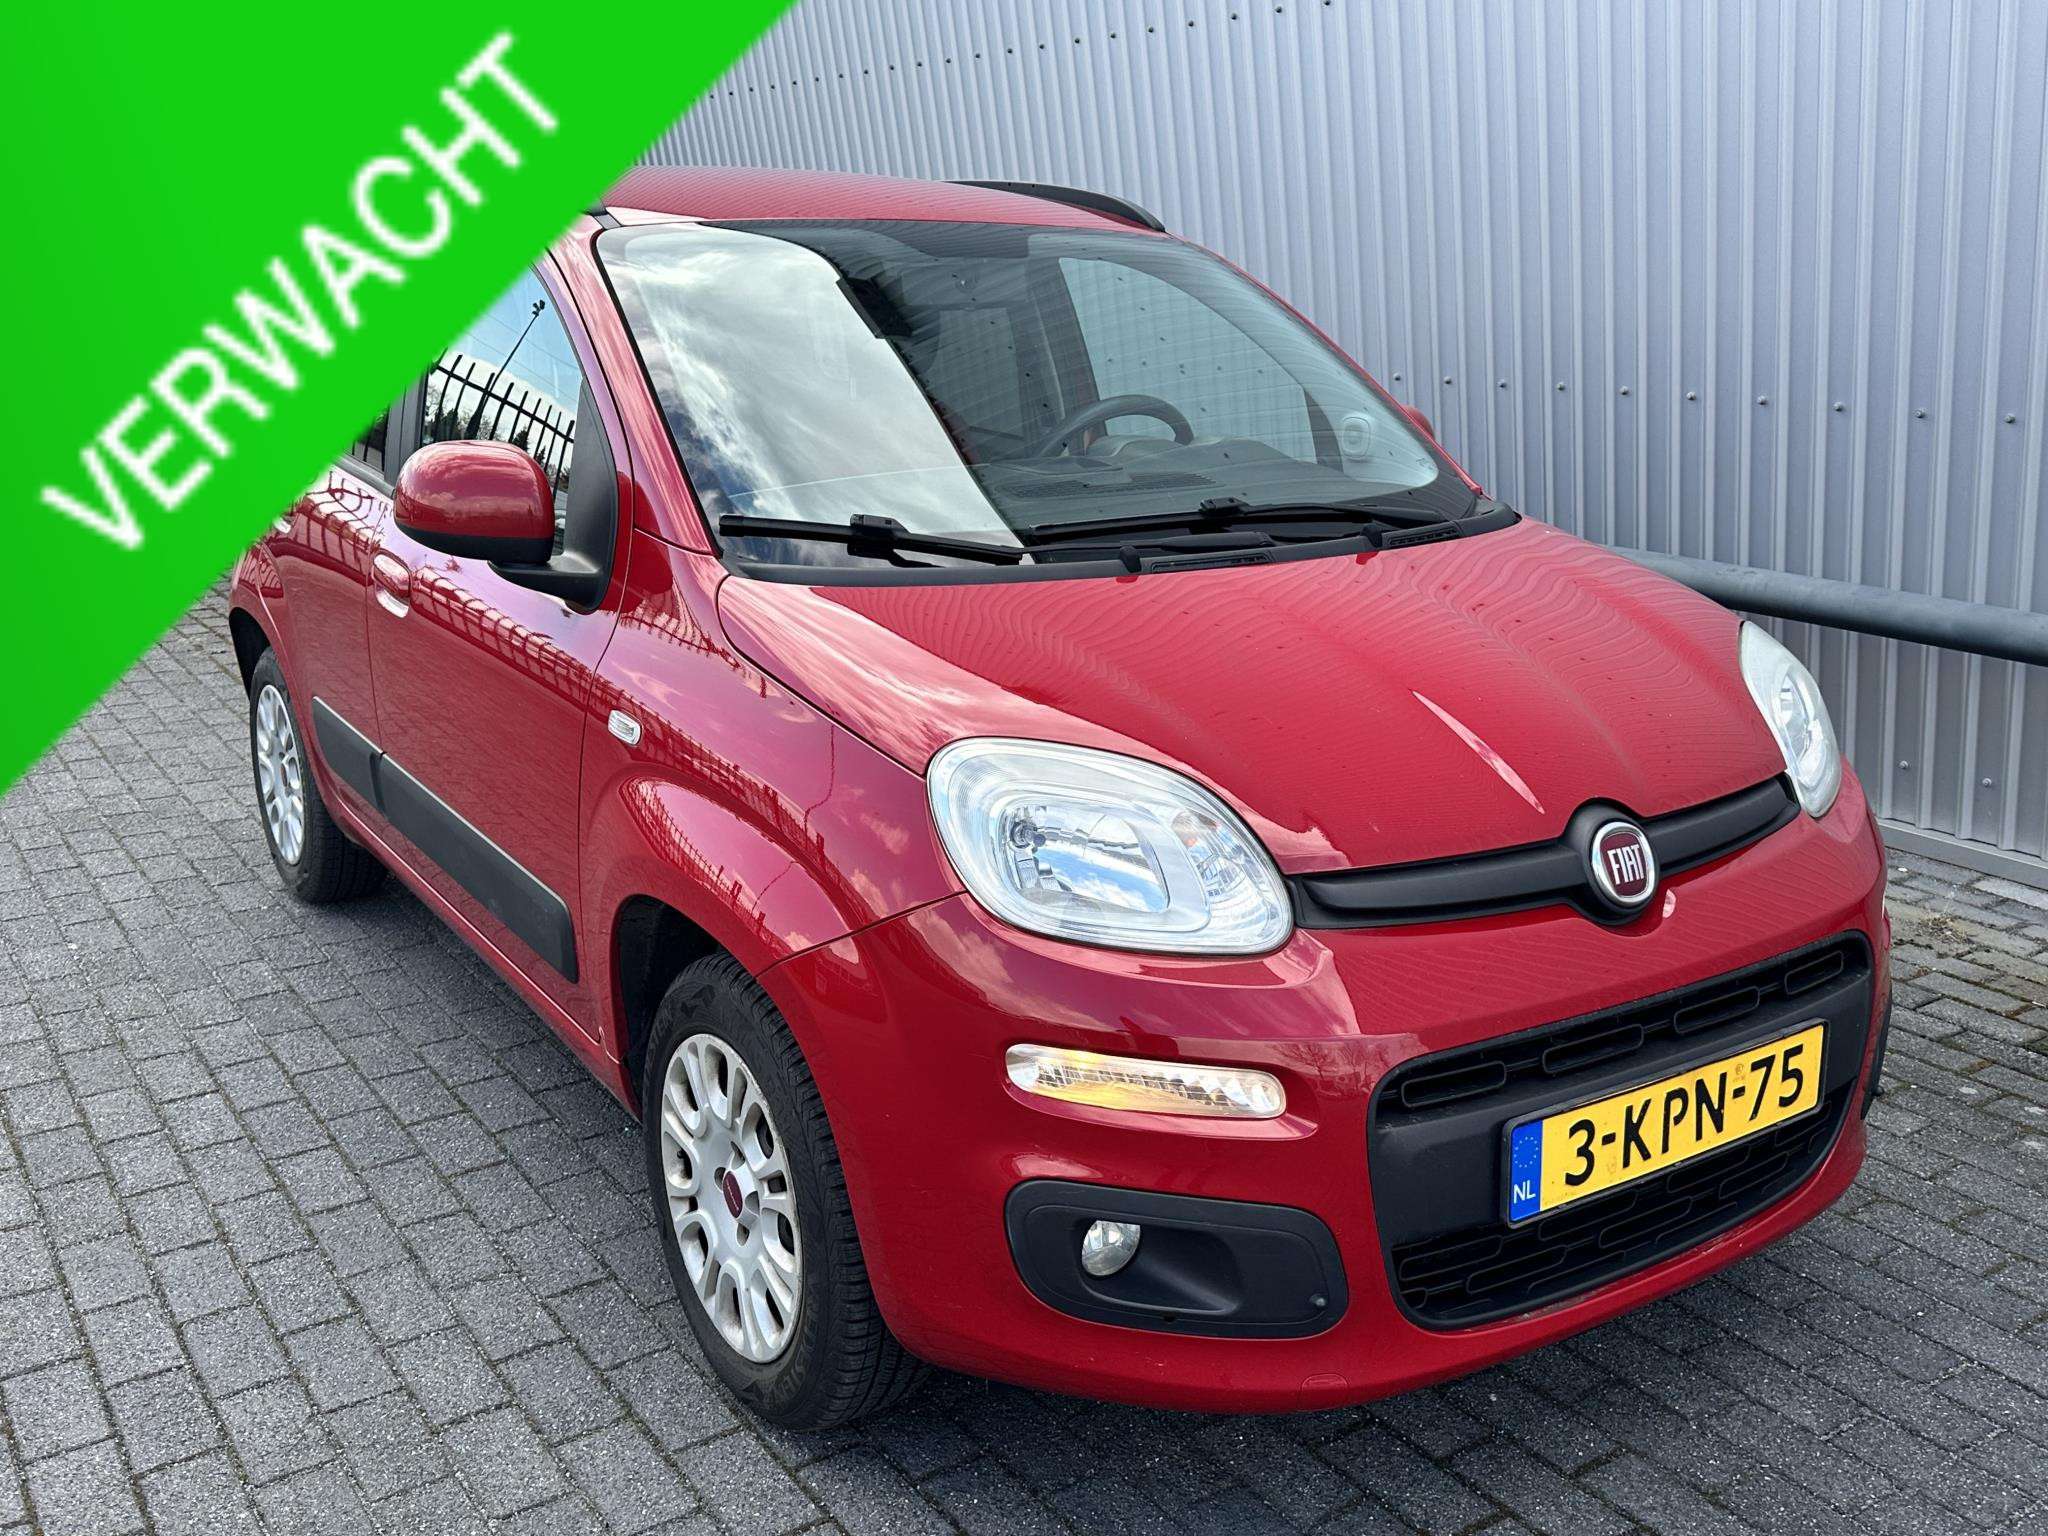 Fiat Panda Compact in Red used in HOOGEVEEN for € 7,450.-